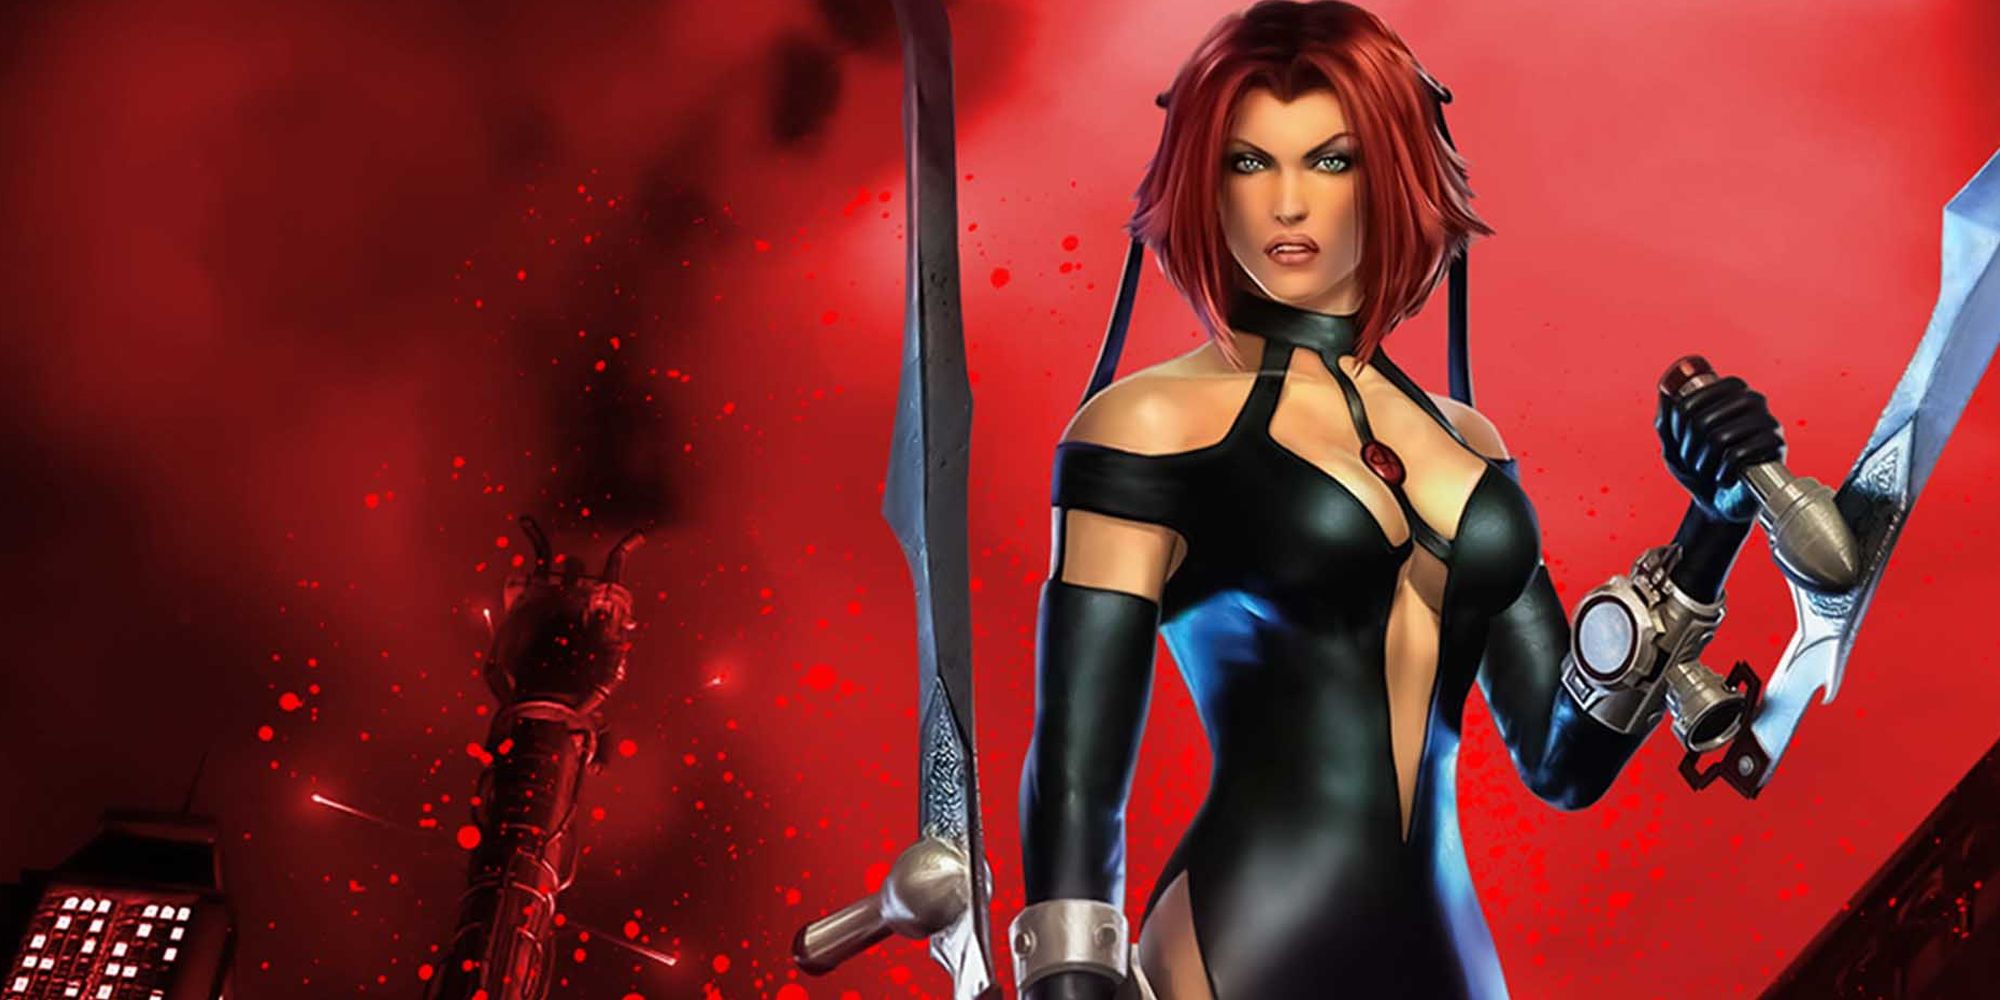 rayne from bloodrayne cover art